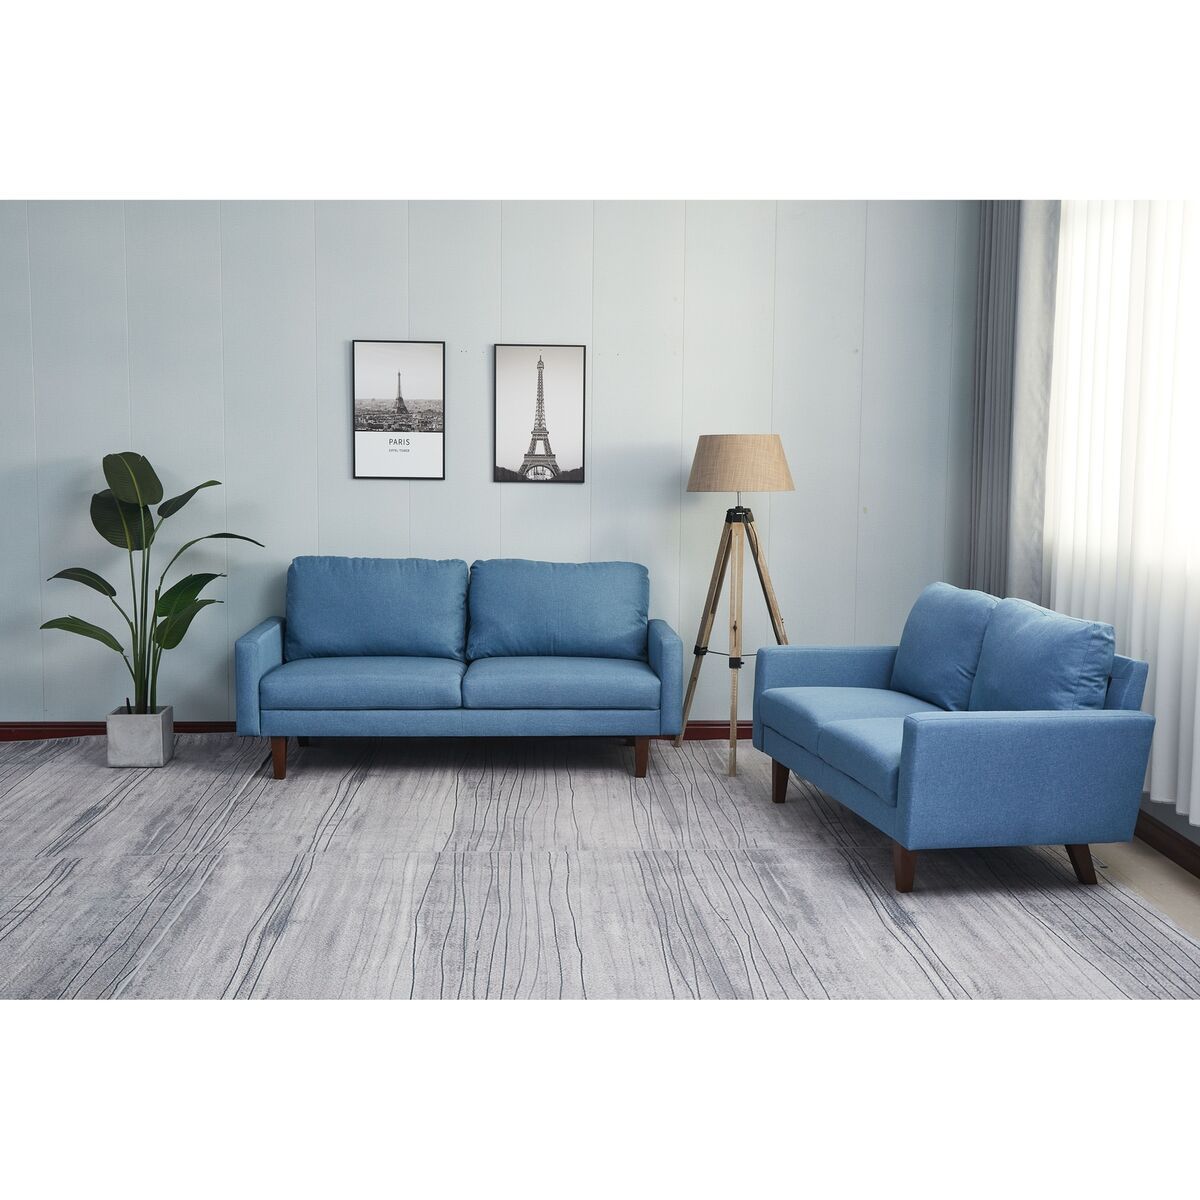 Linen 2 Piece Loveseat And Sofa Living Room Set Sky Blue Modern &  Contemporary | Ebay Intended For Modern Blue Linen Sofas (View 15 of 15)